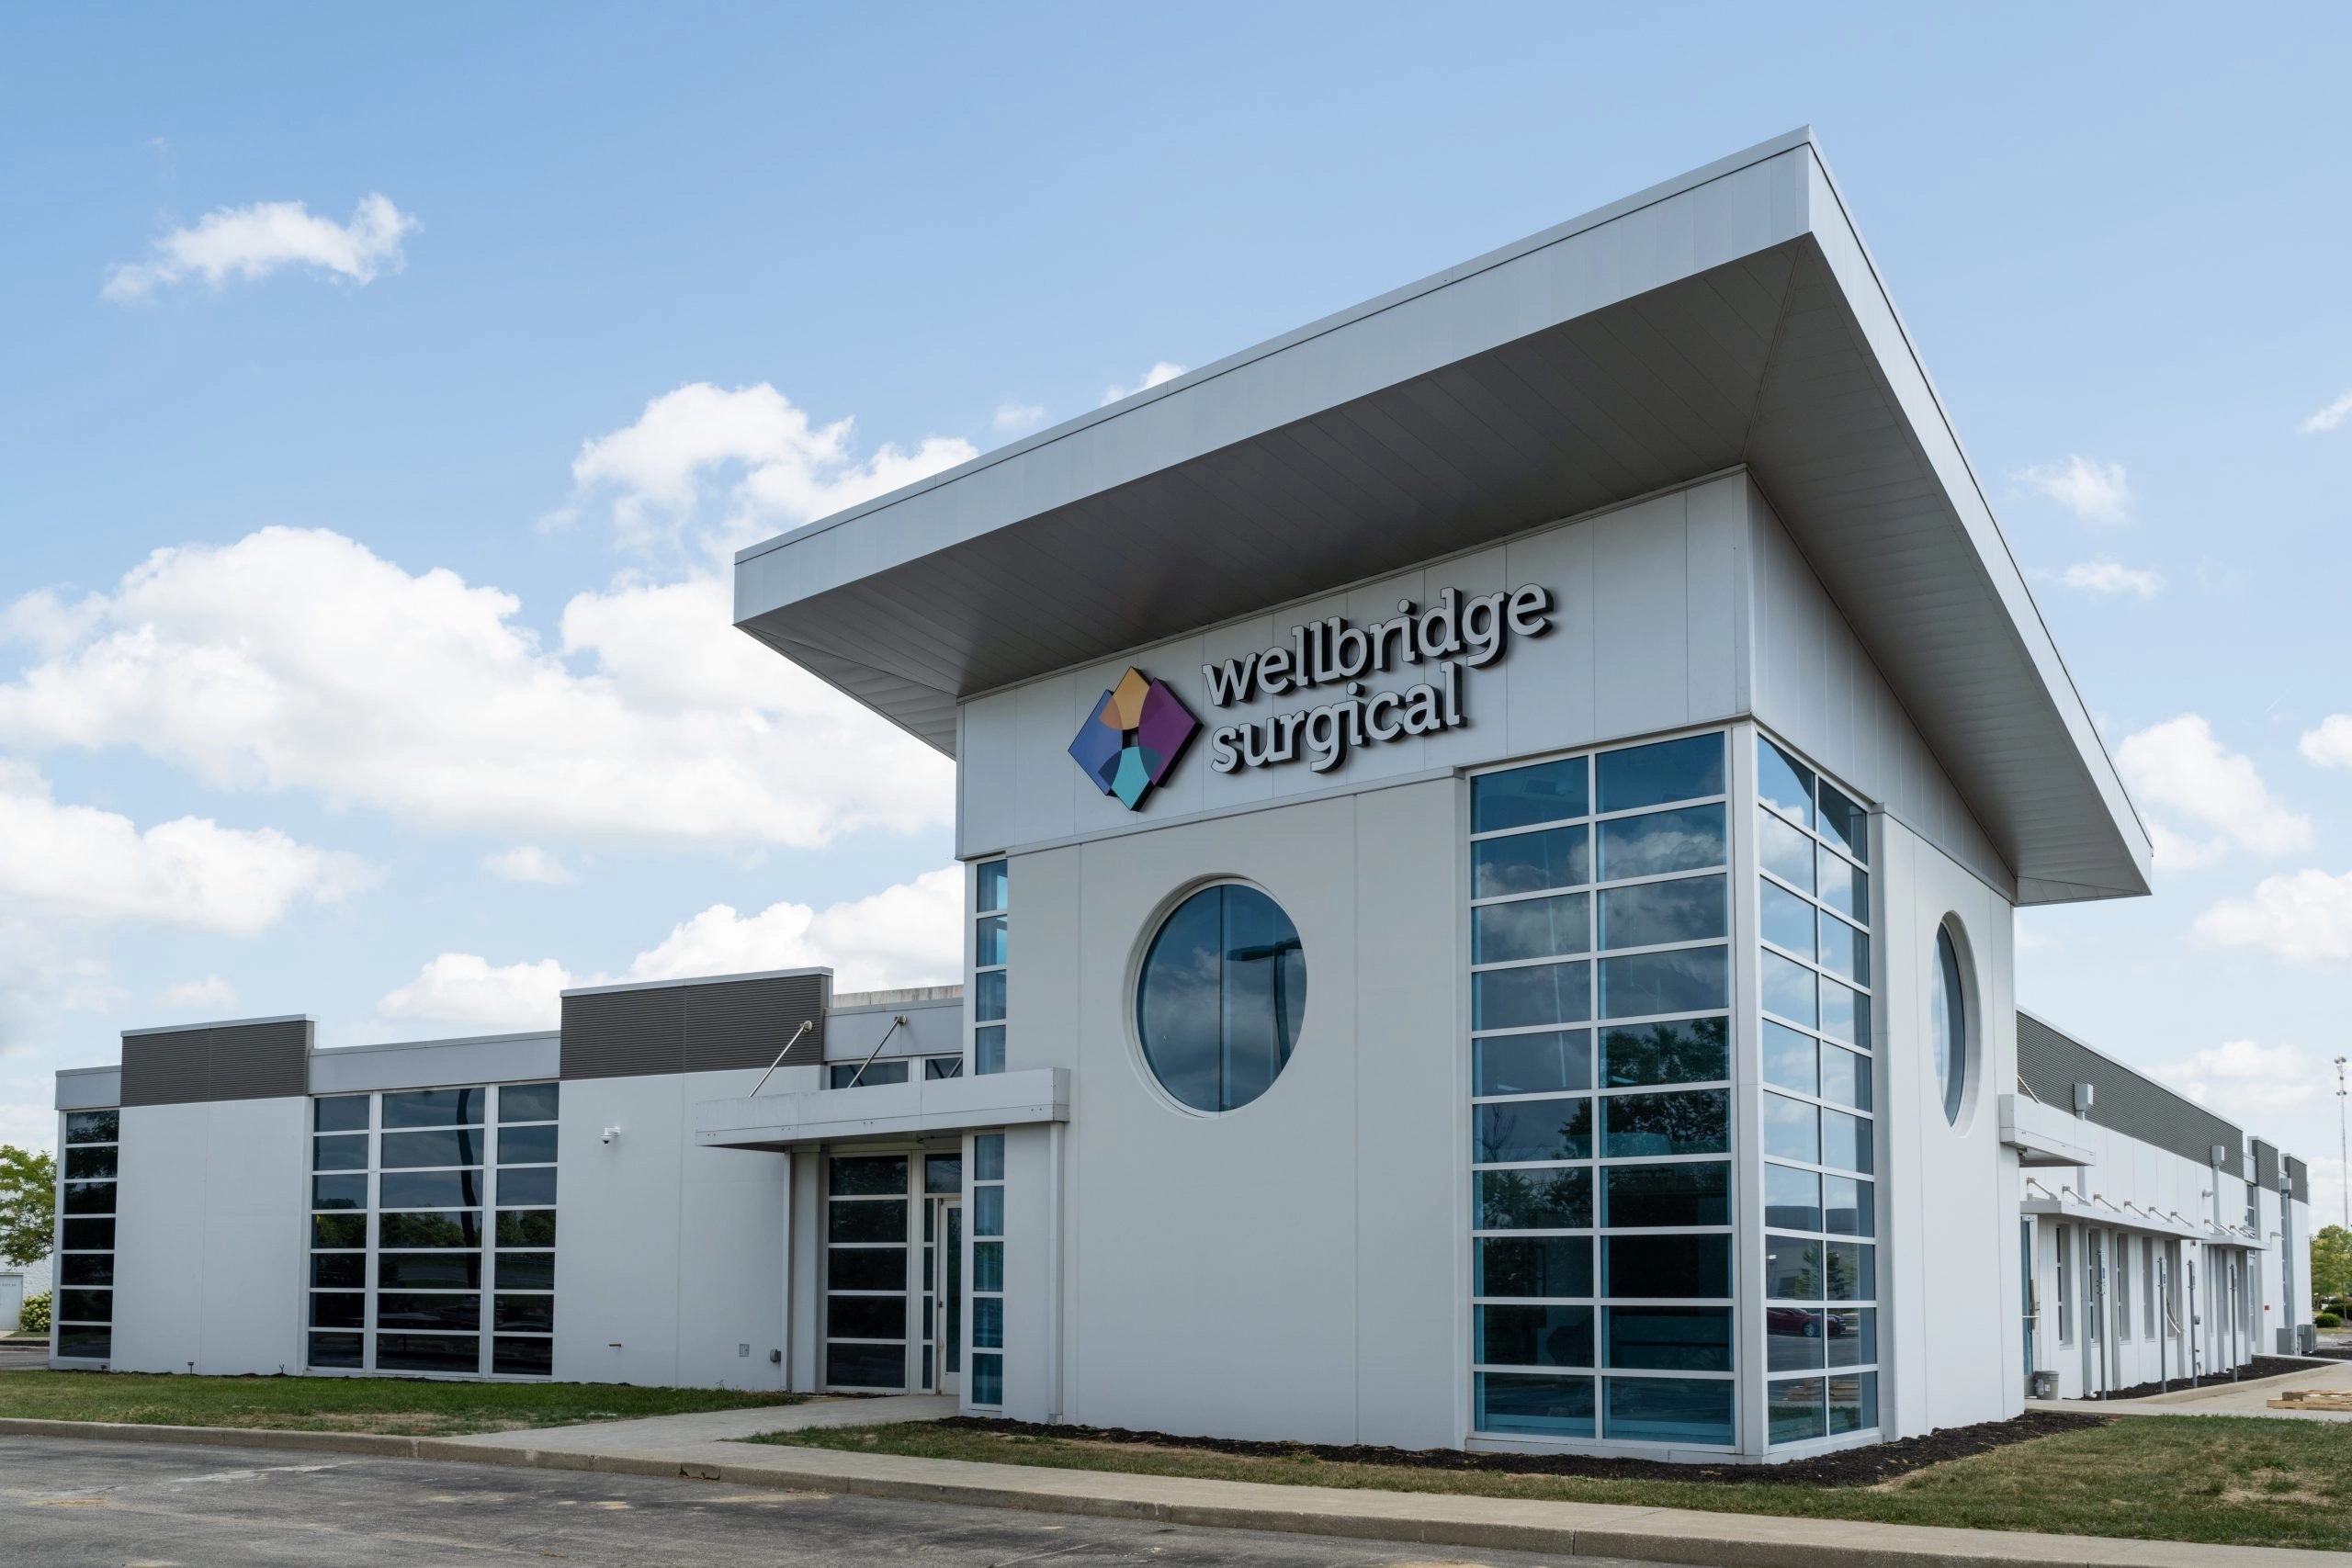 WELLBRIDGE SURGICAL: A Revolution in Indiana Health Care